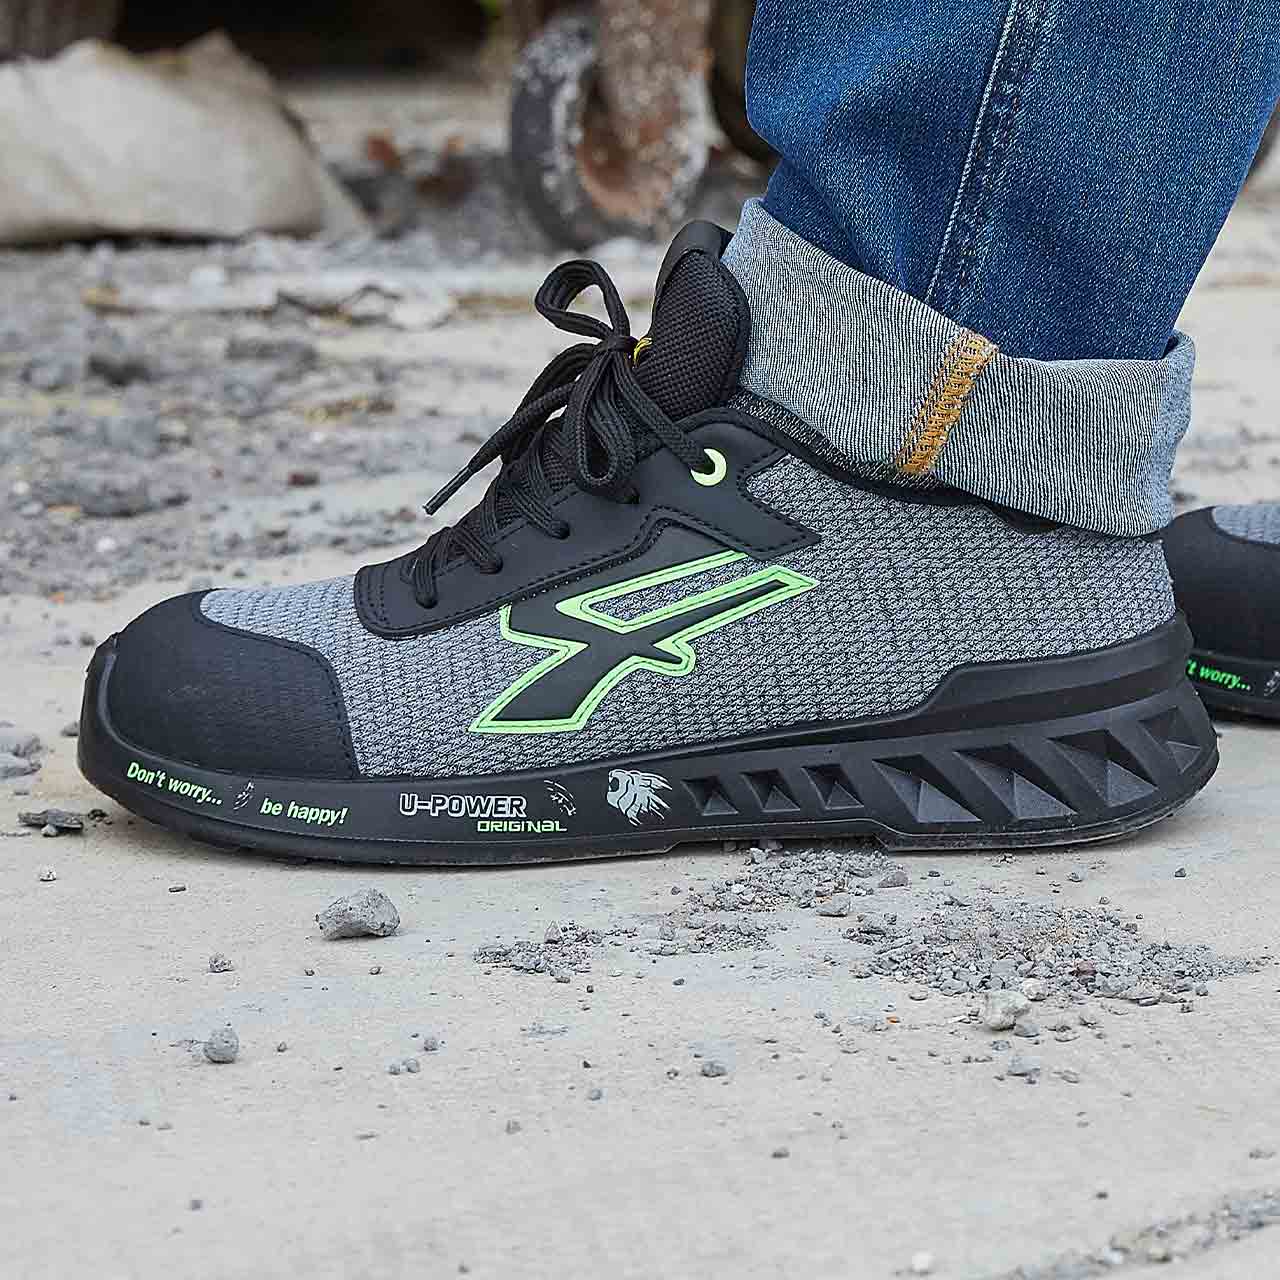 U-Power Red Leve, super light safety shoes - Mike style